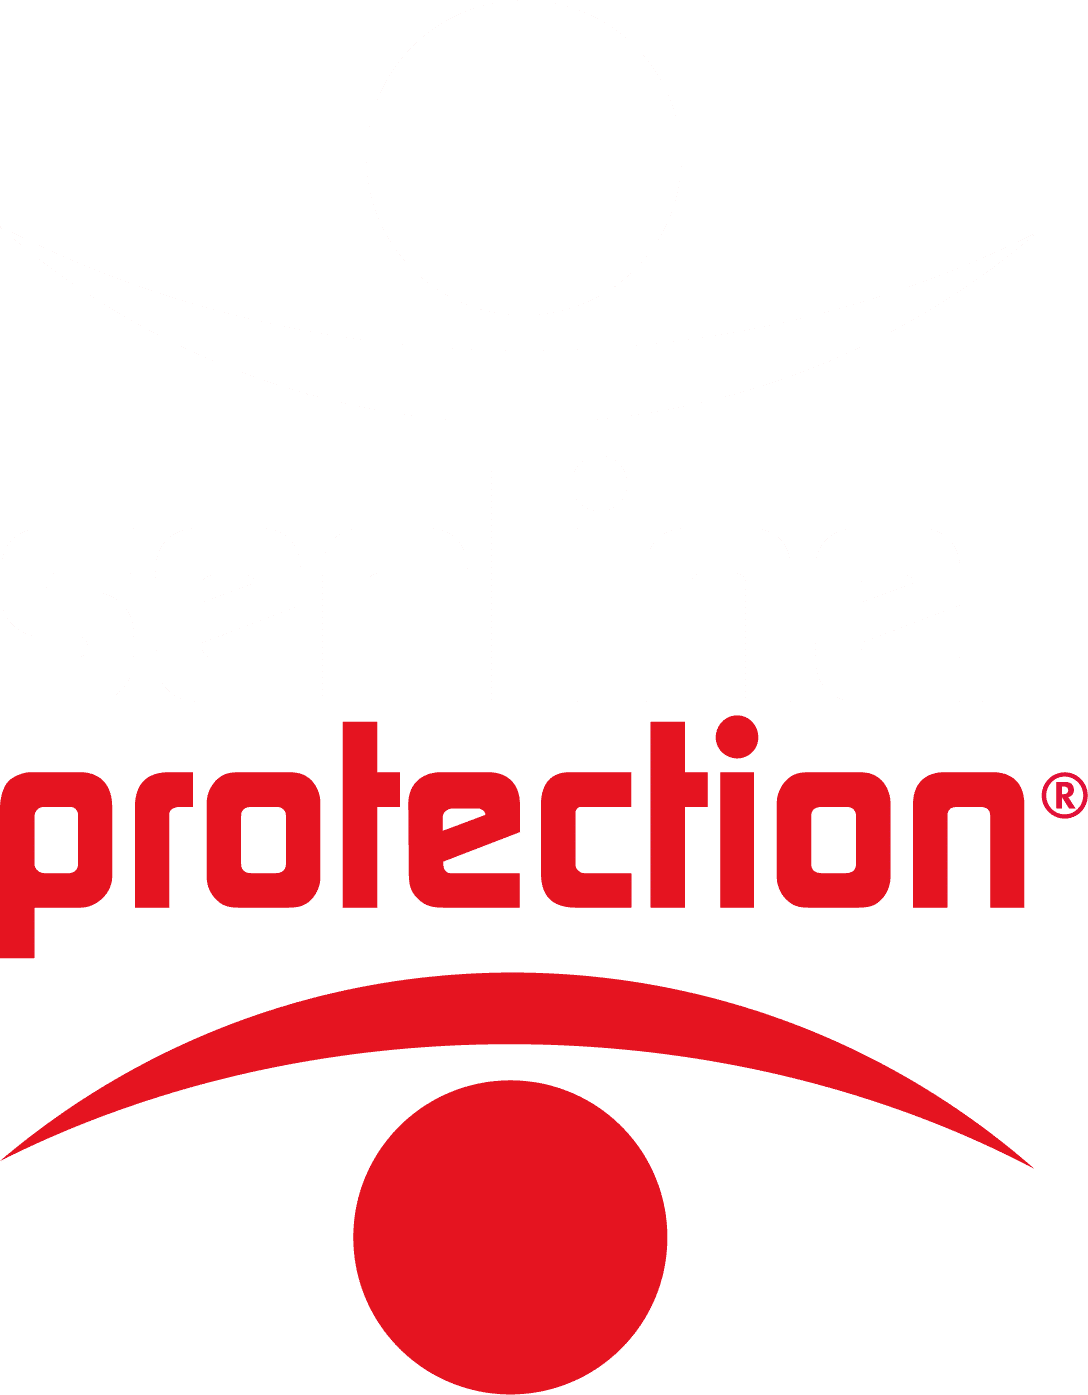 (c) Sentinelsecuritysystems.ch